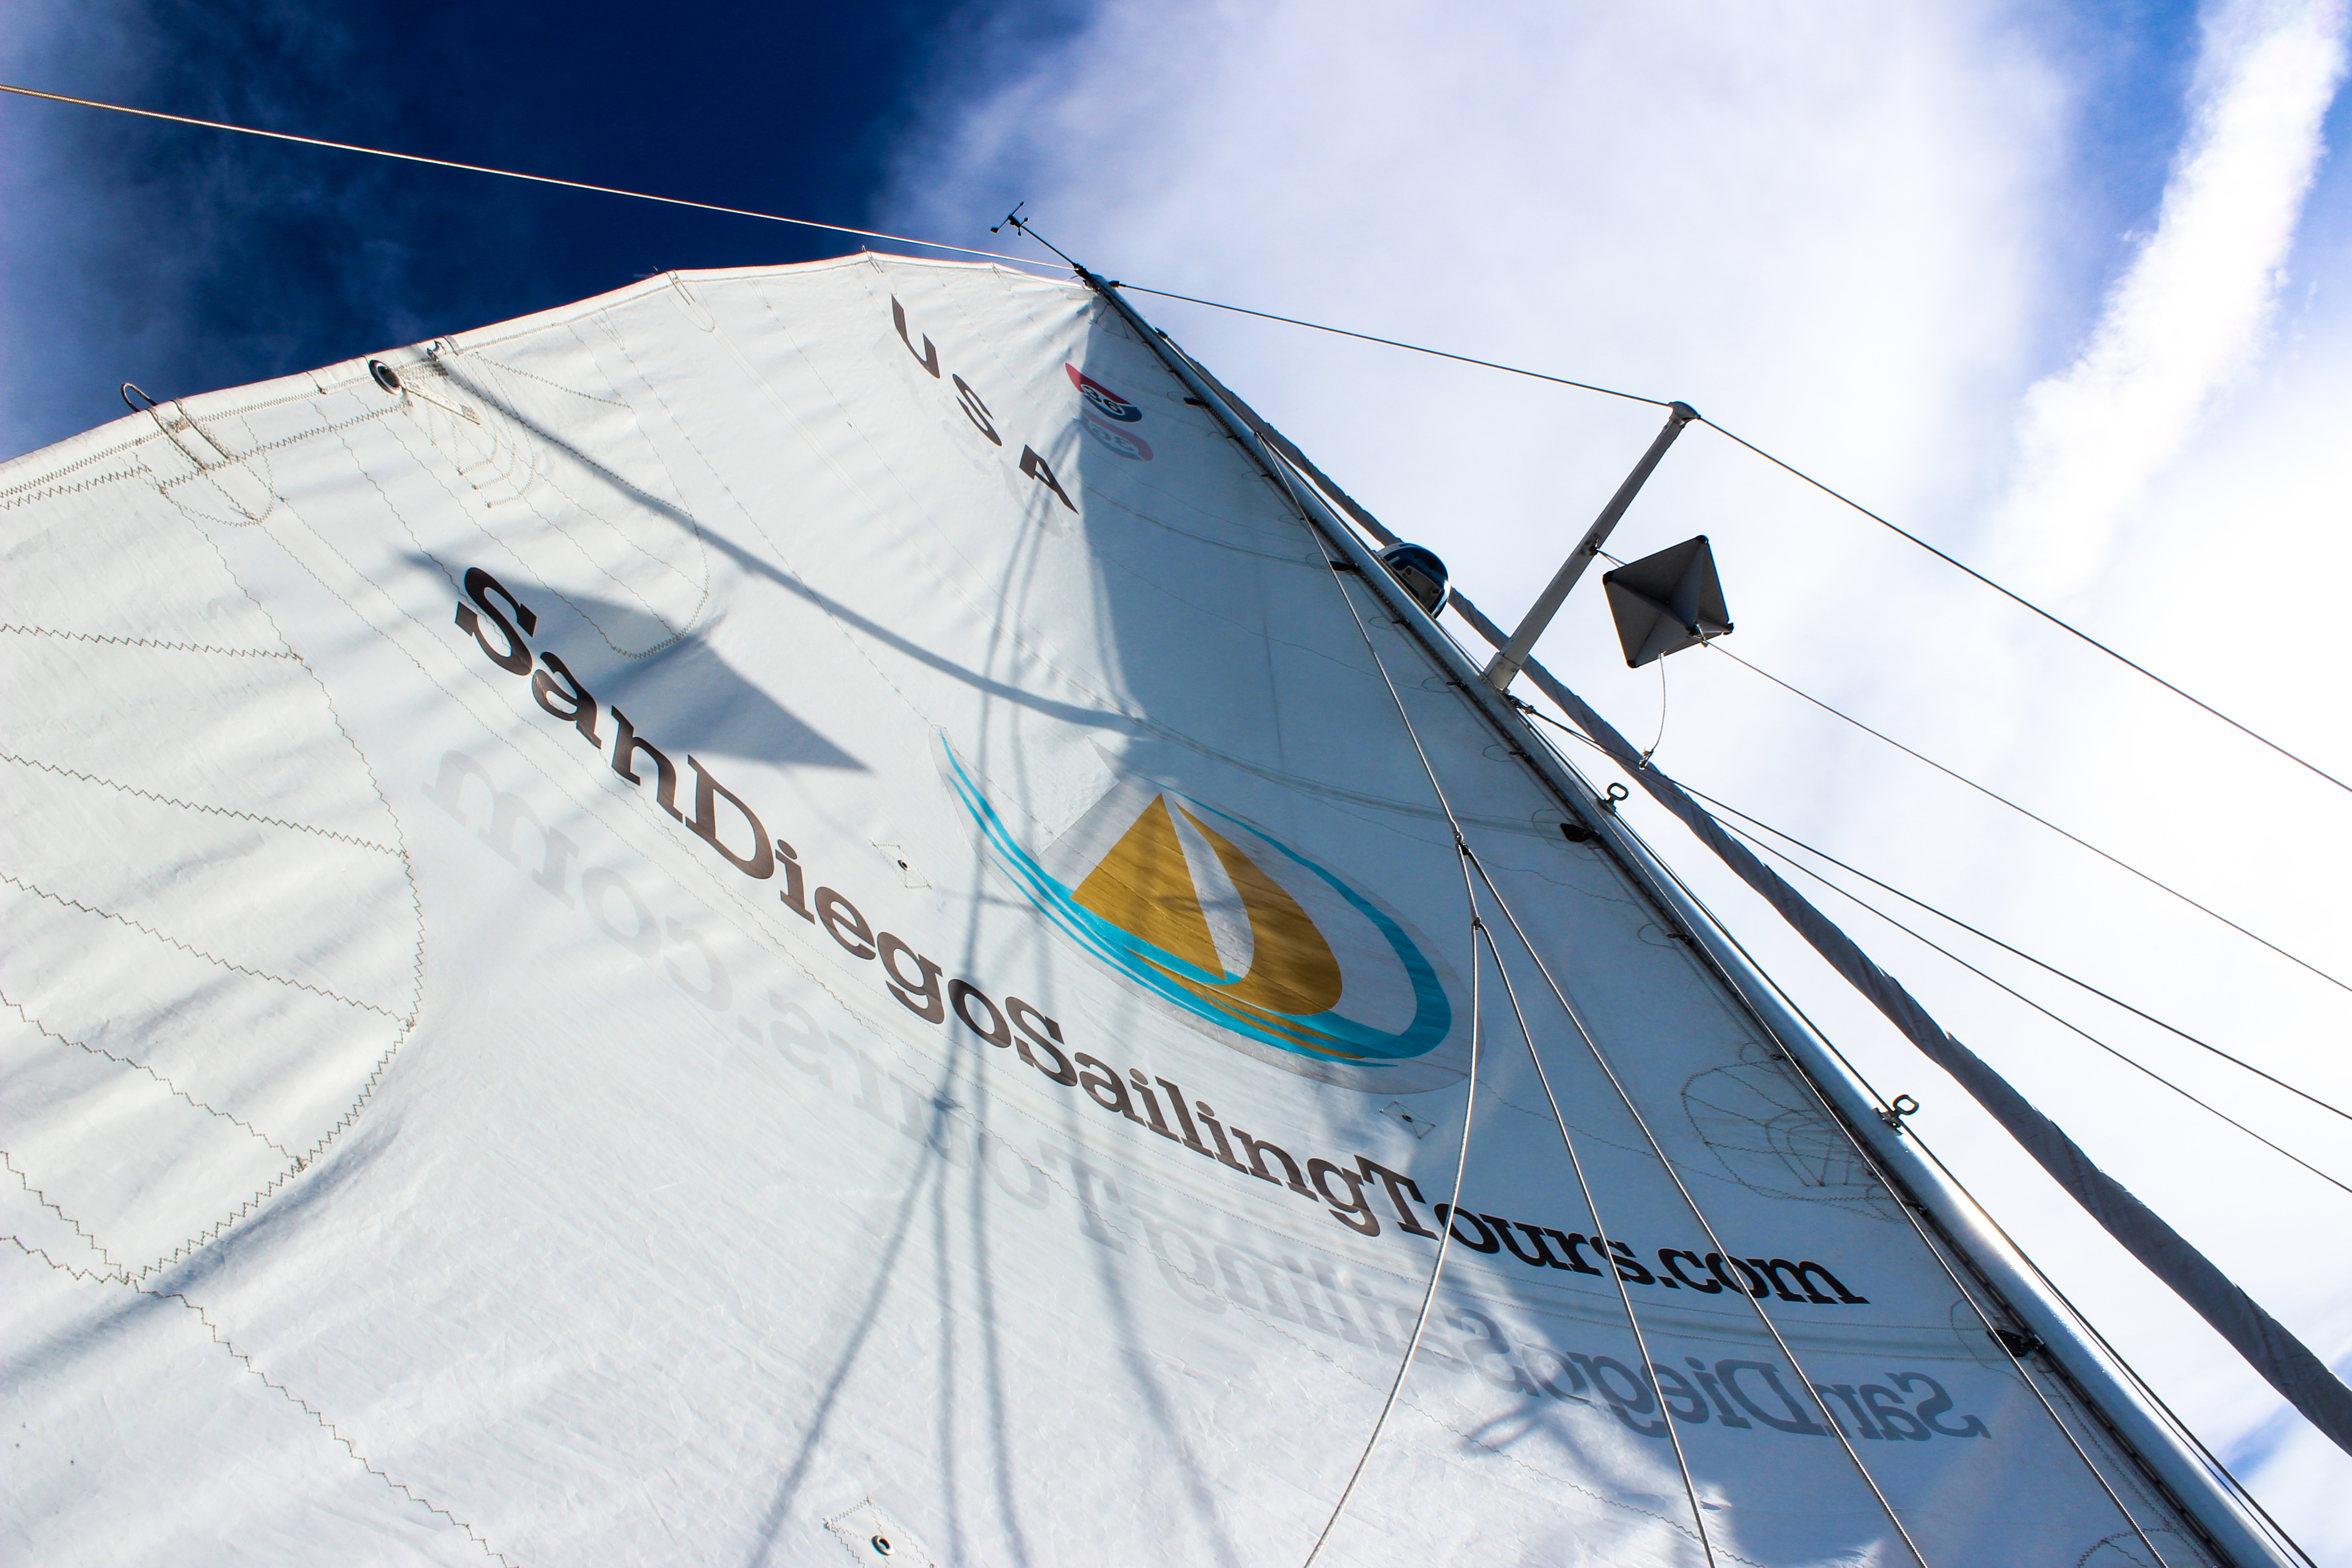 view looking up on a sail with blue skies and clouds above, the sail making a point above viewer. San Diego Sailing Tours logo on sail